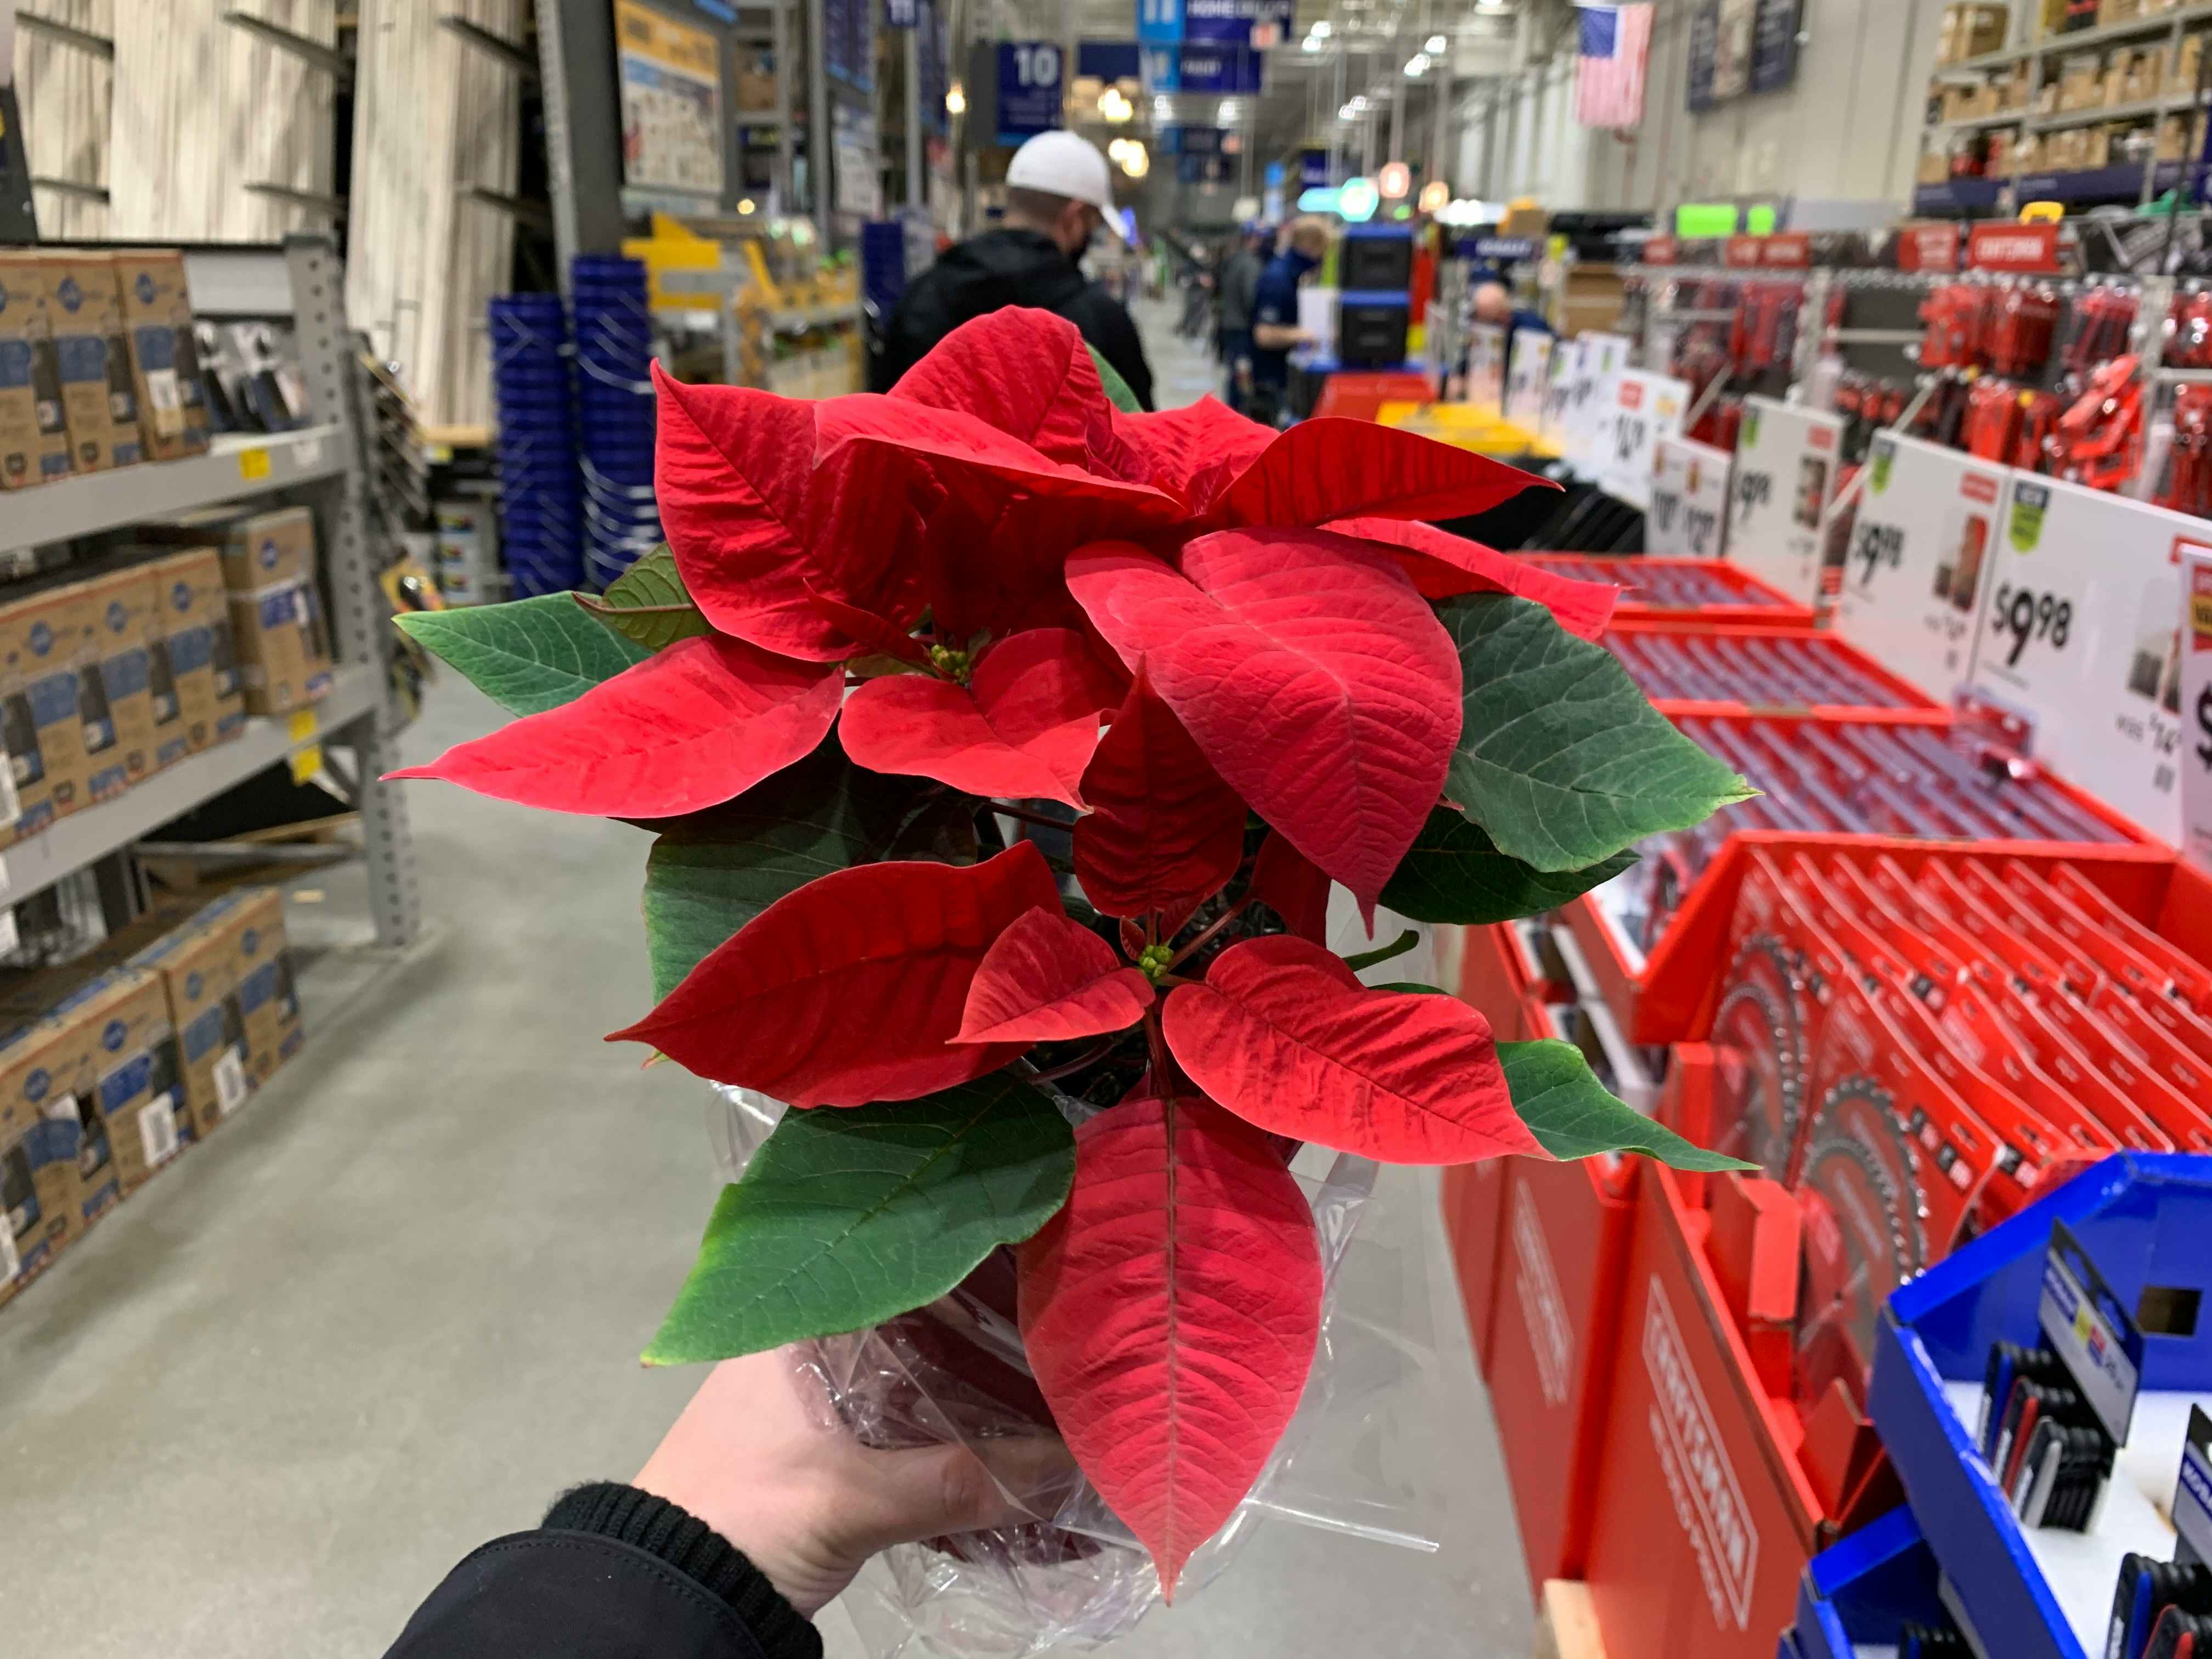 A Poinsettia plant being held up in an aisle at Lowe's black friday.